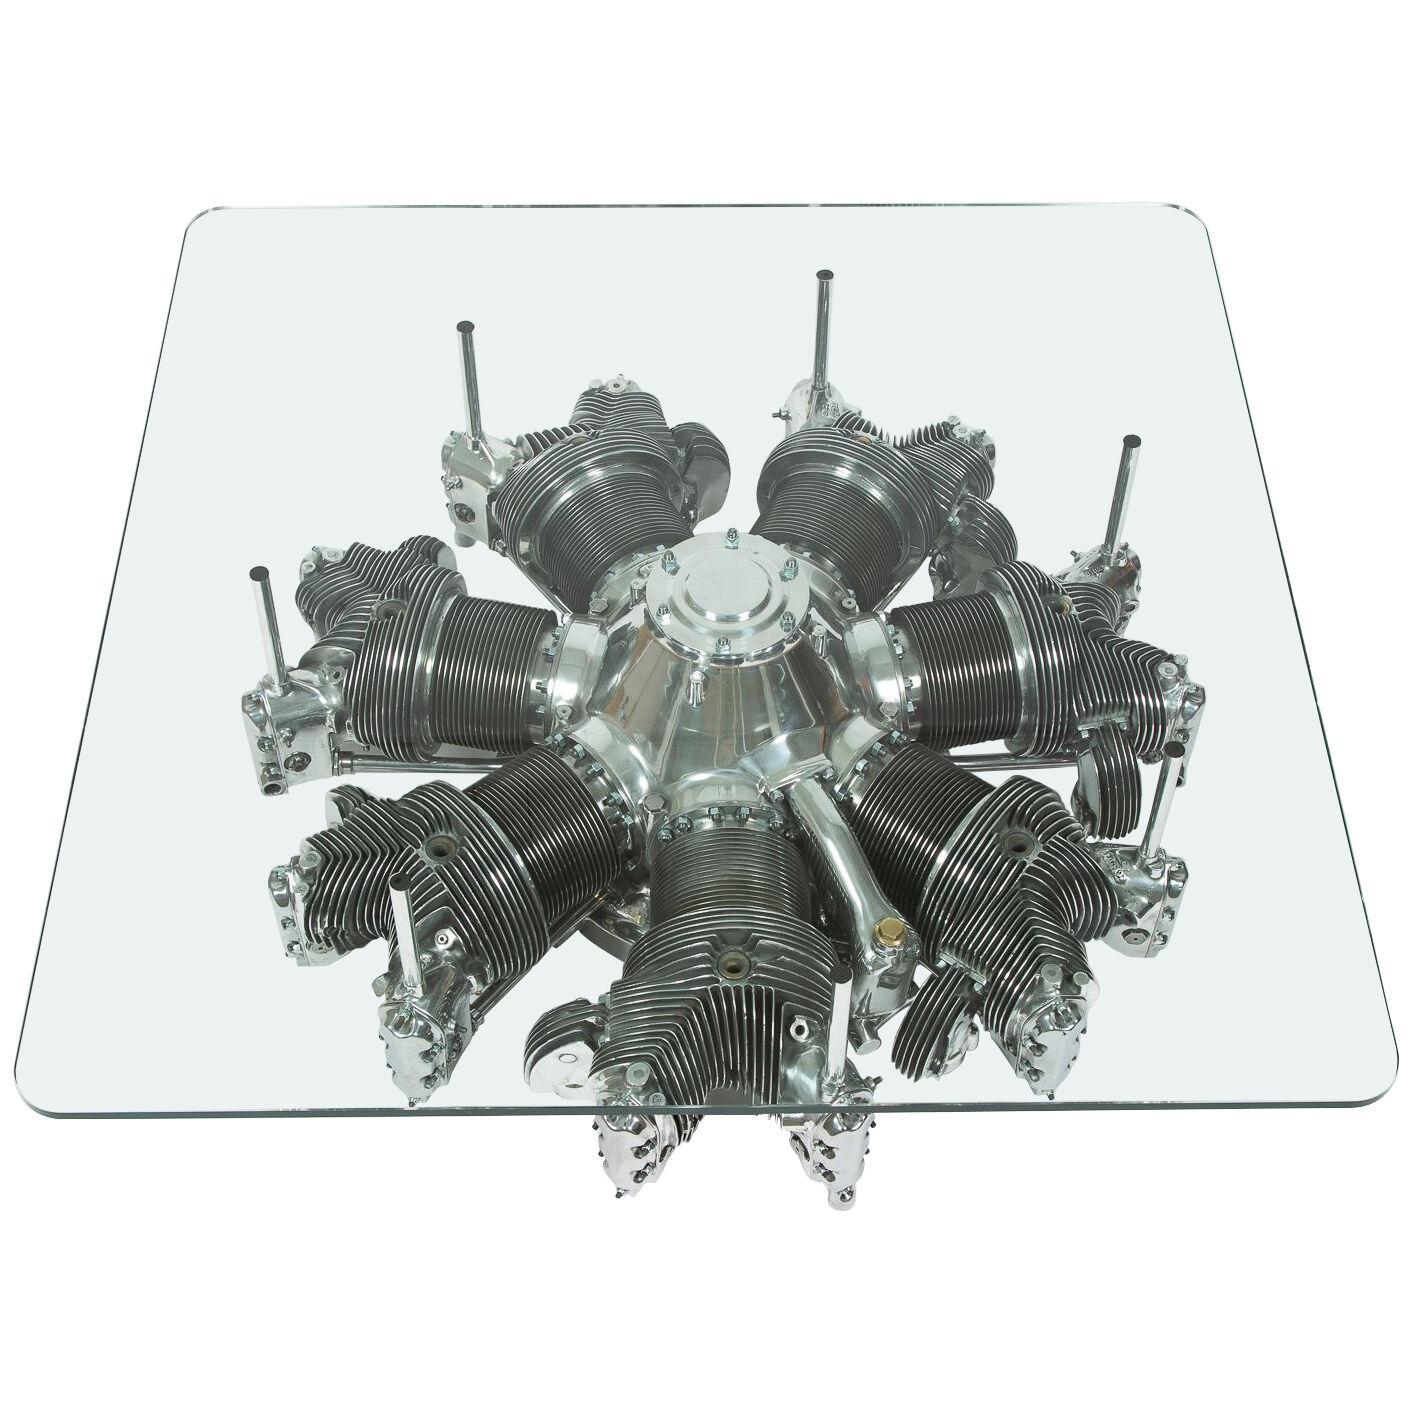 WWII Continental radial aircraft engine table